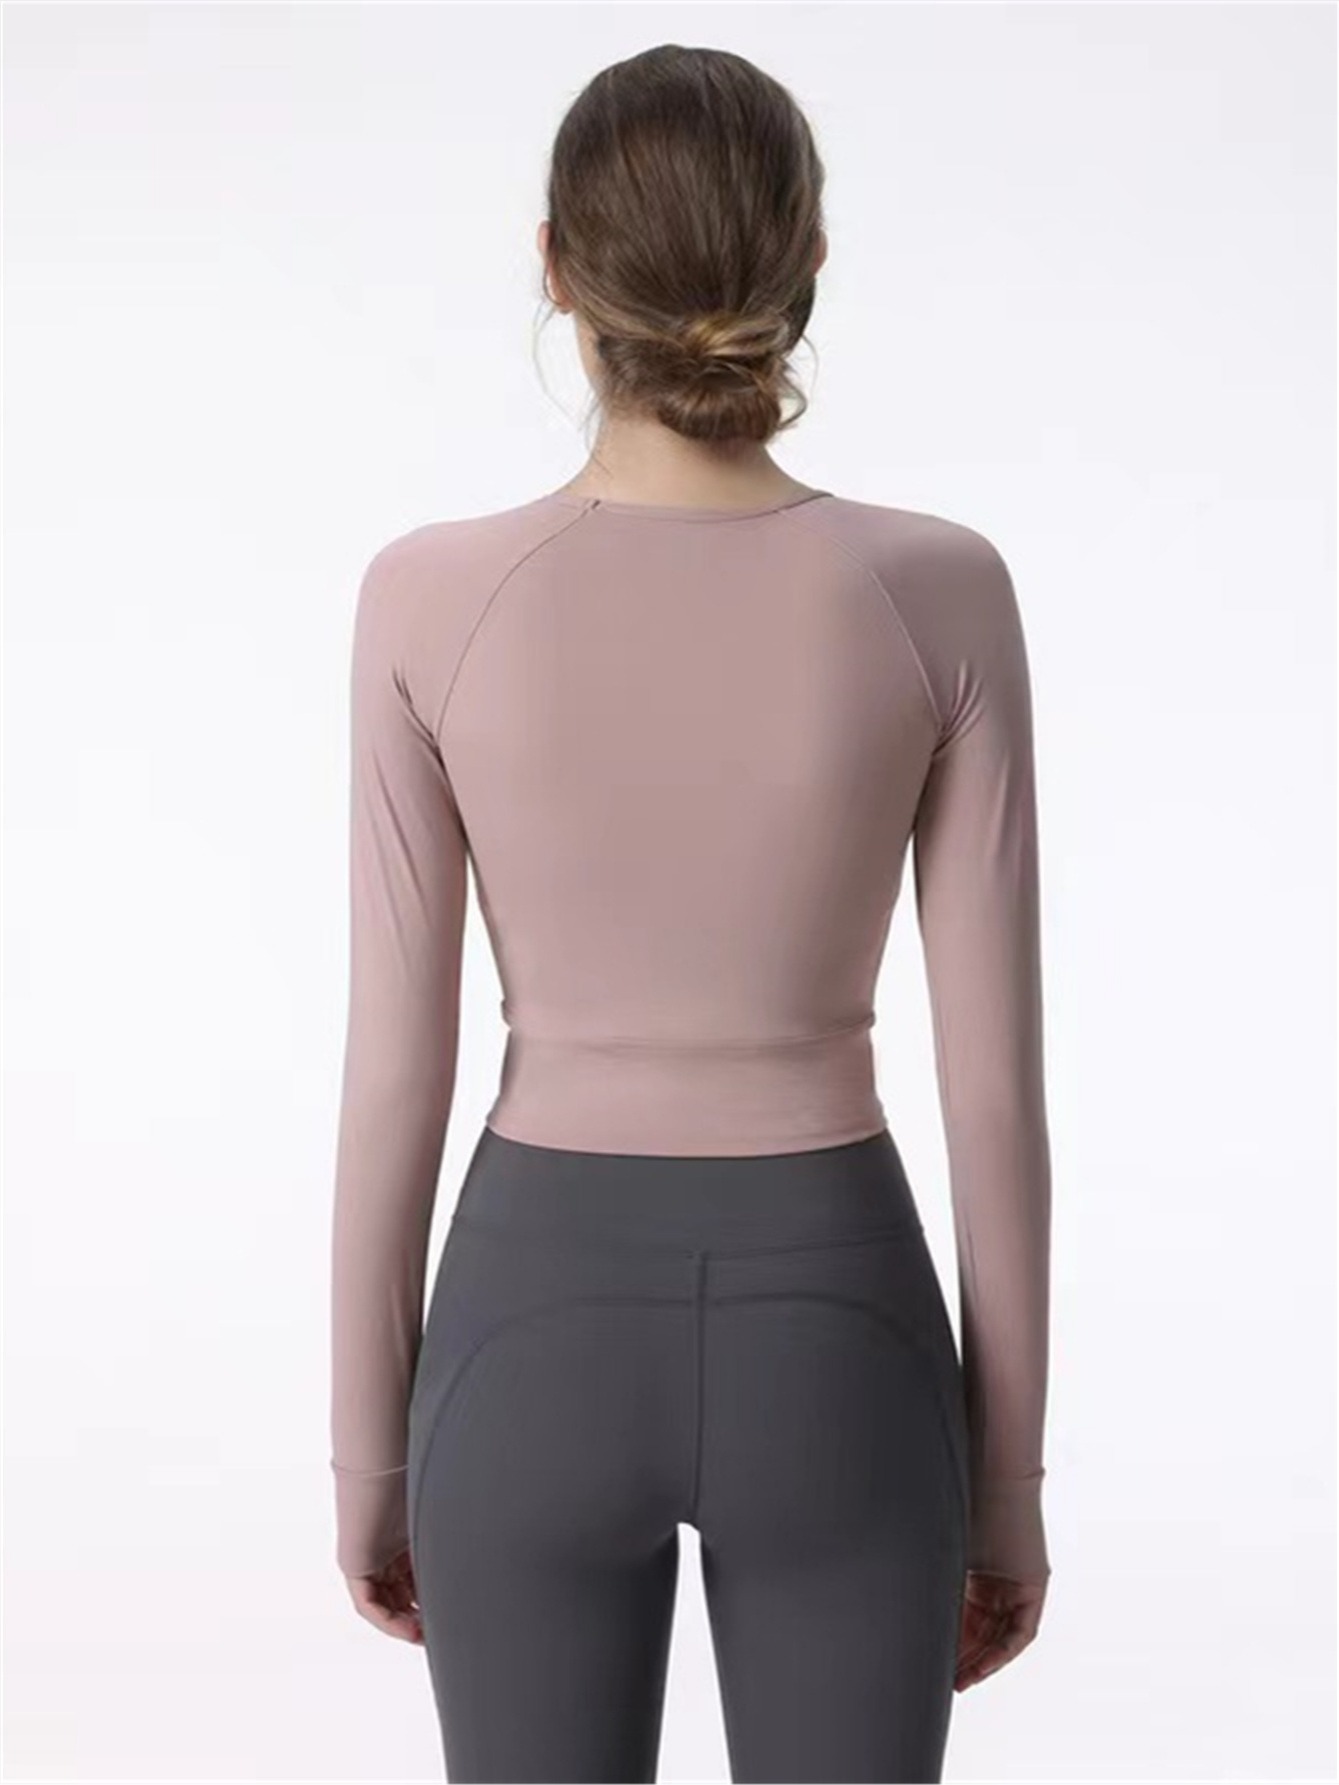 Yoga Clothes Long-sleeved Women's Lulu Sports Top Running Fitness